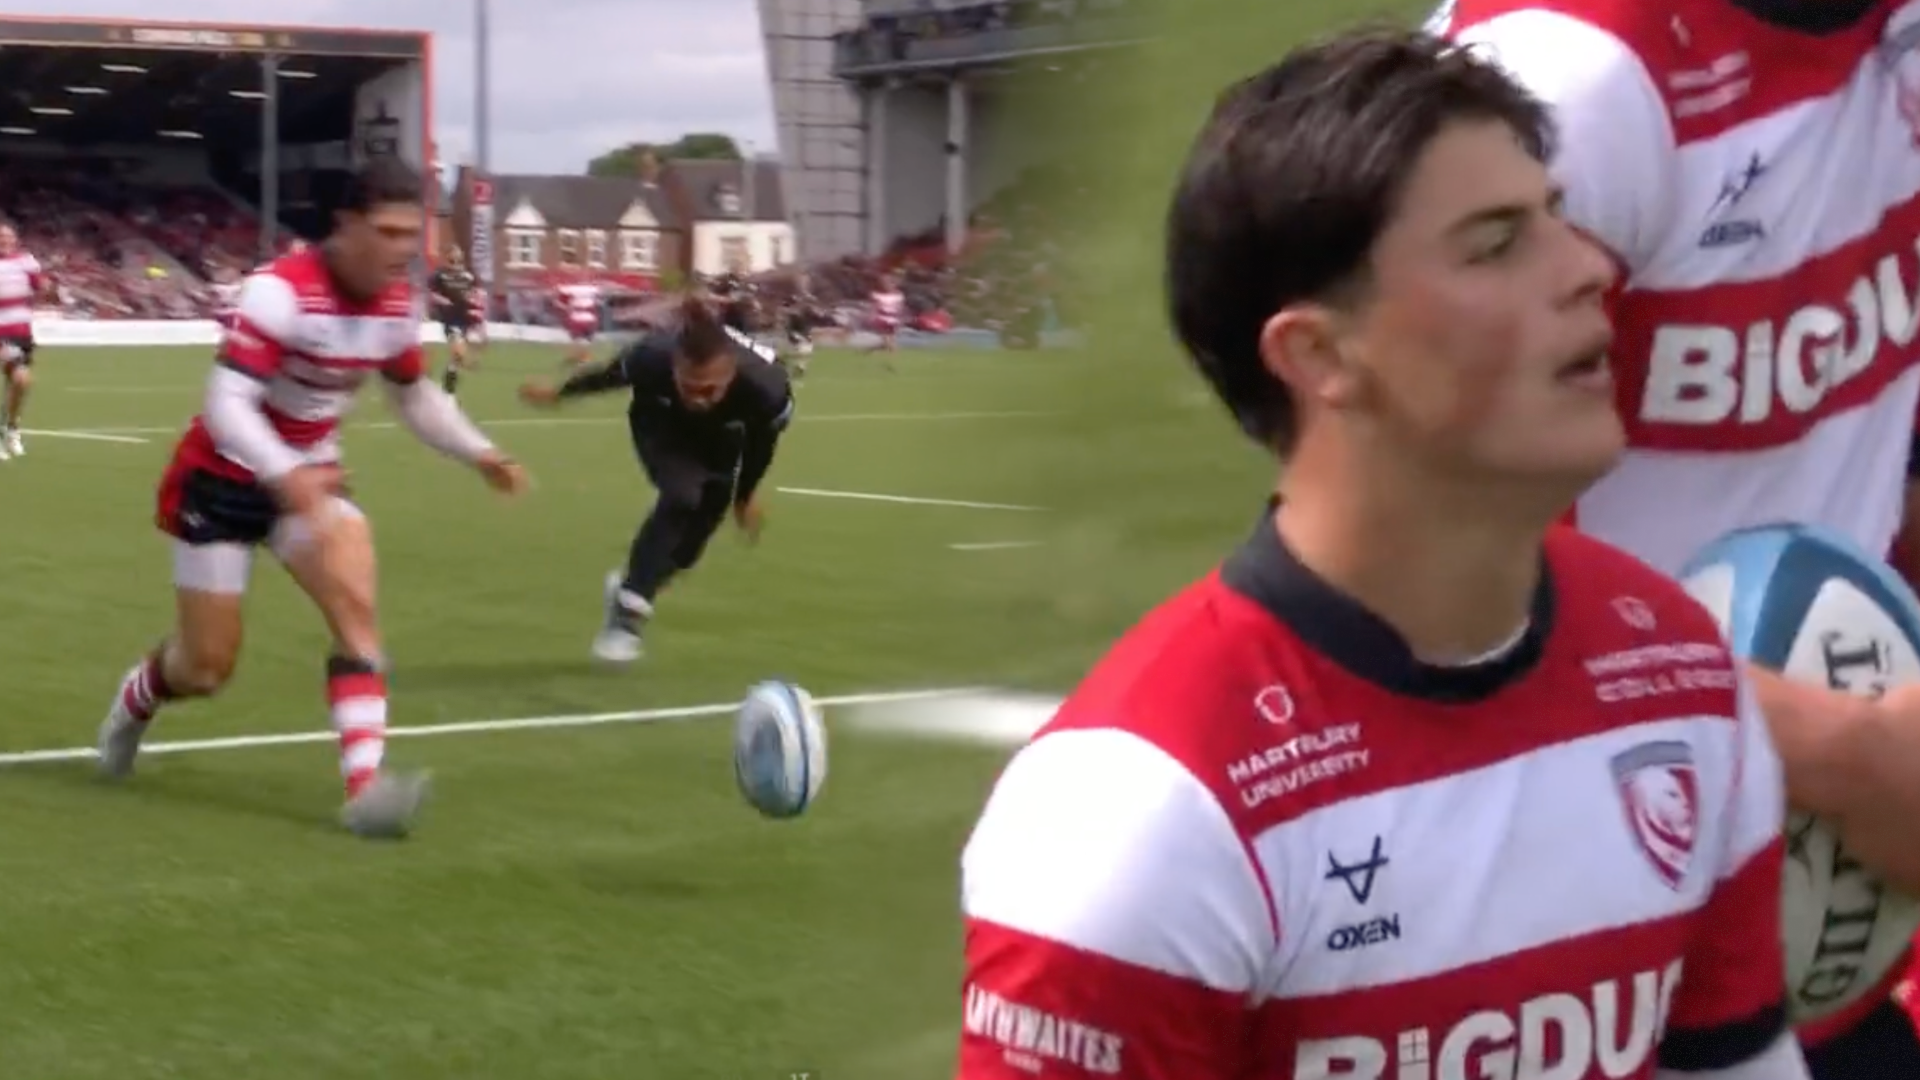 Rees-Zammit reached top speed against Saracens and it was frightening